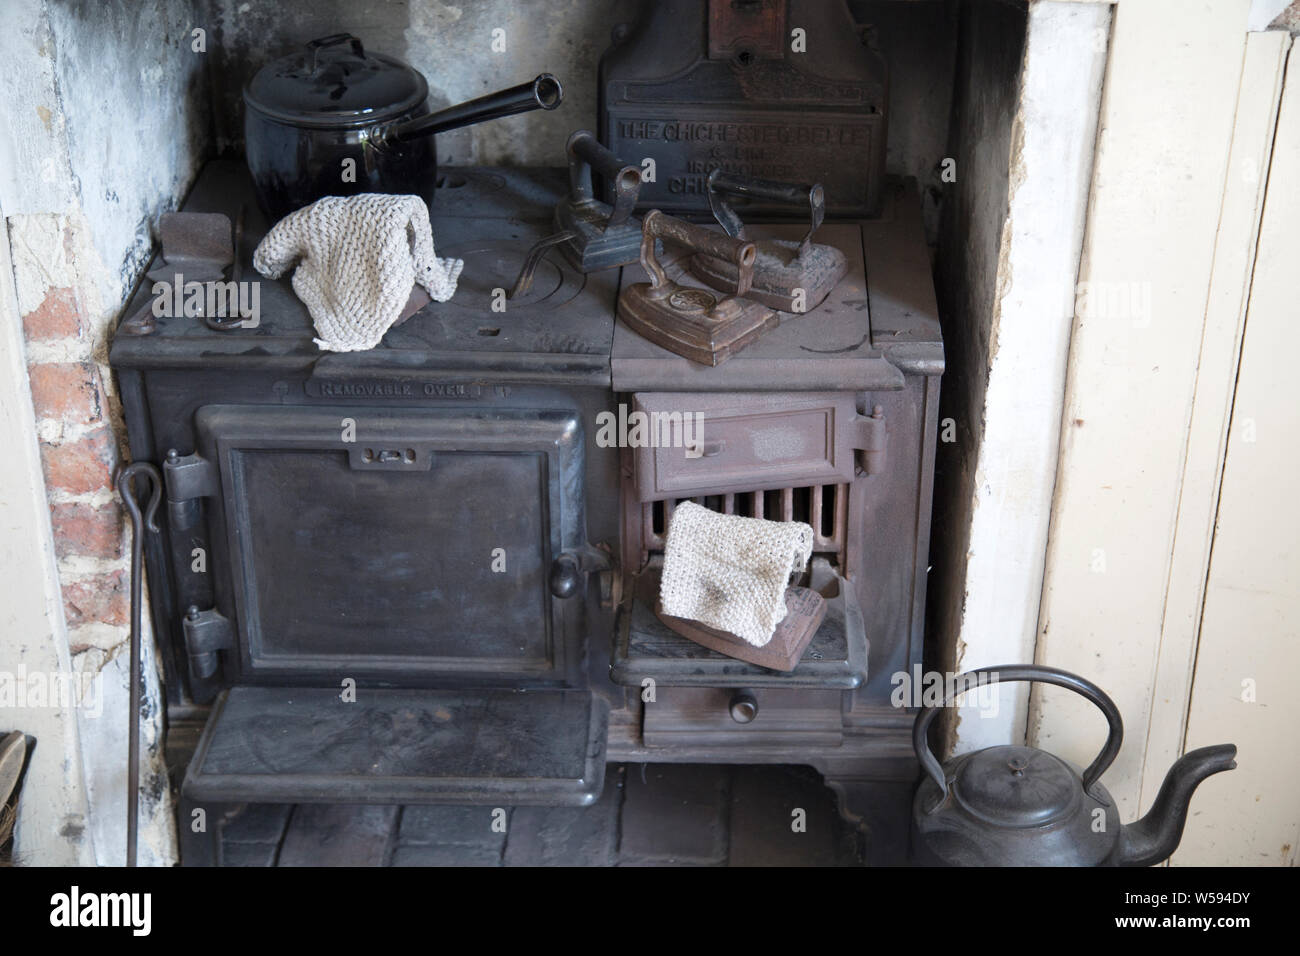 Iron stove, late 19th Century agricultural labourers home furniture Stock Photo